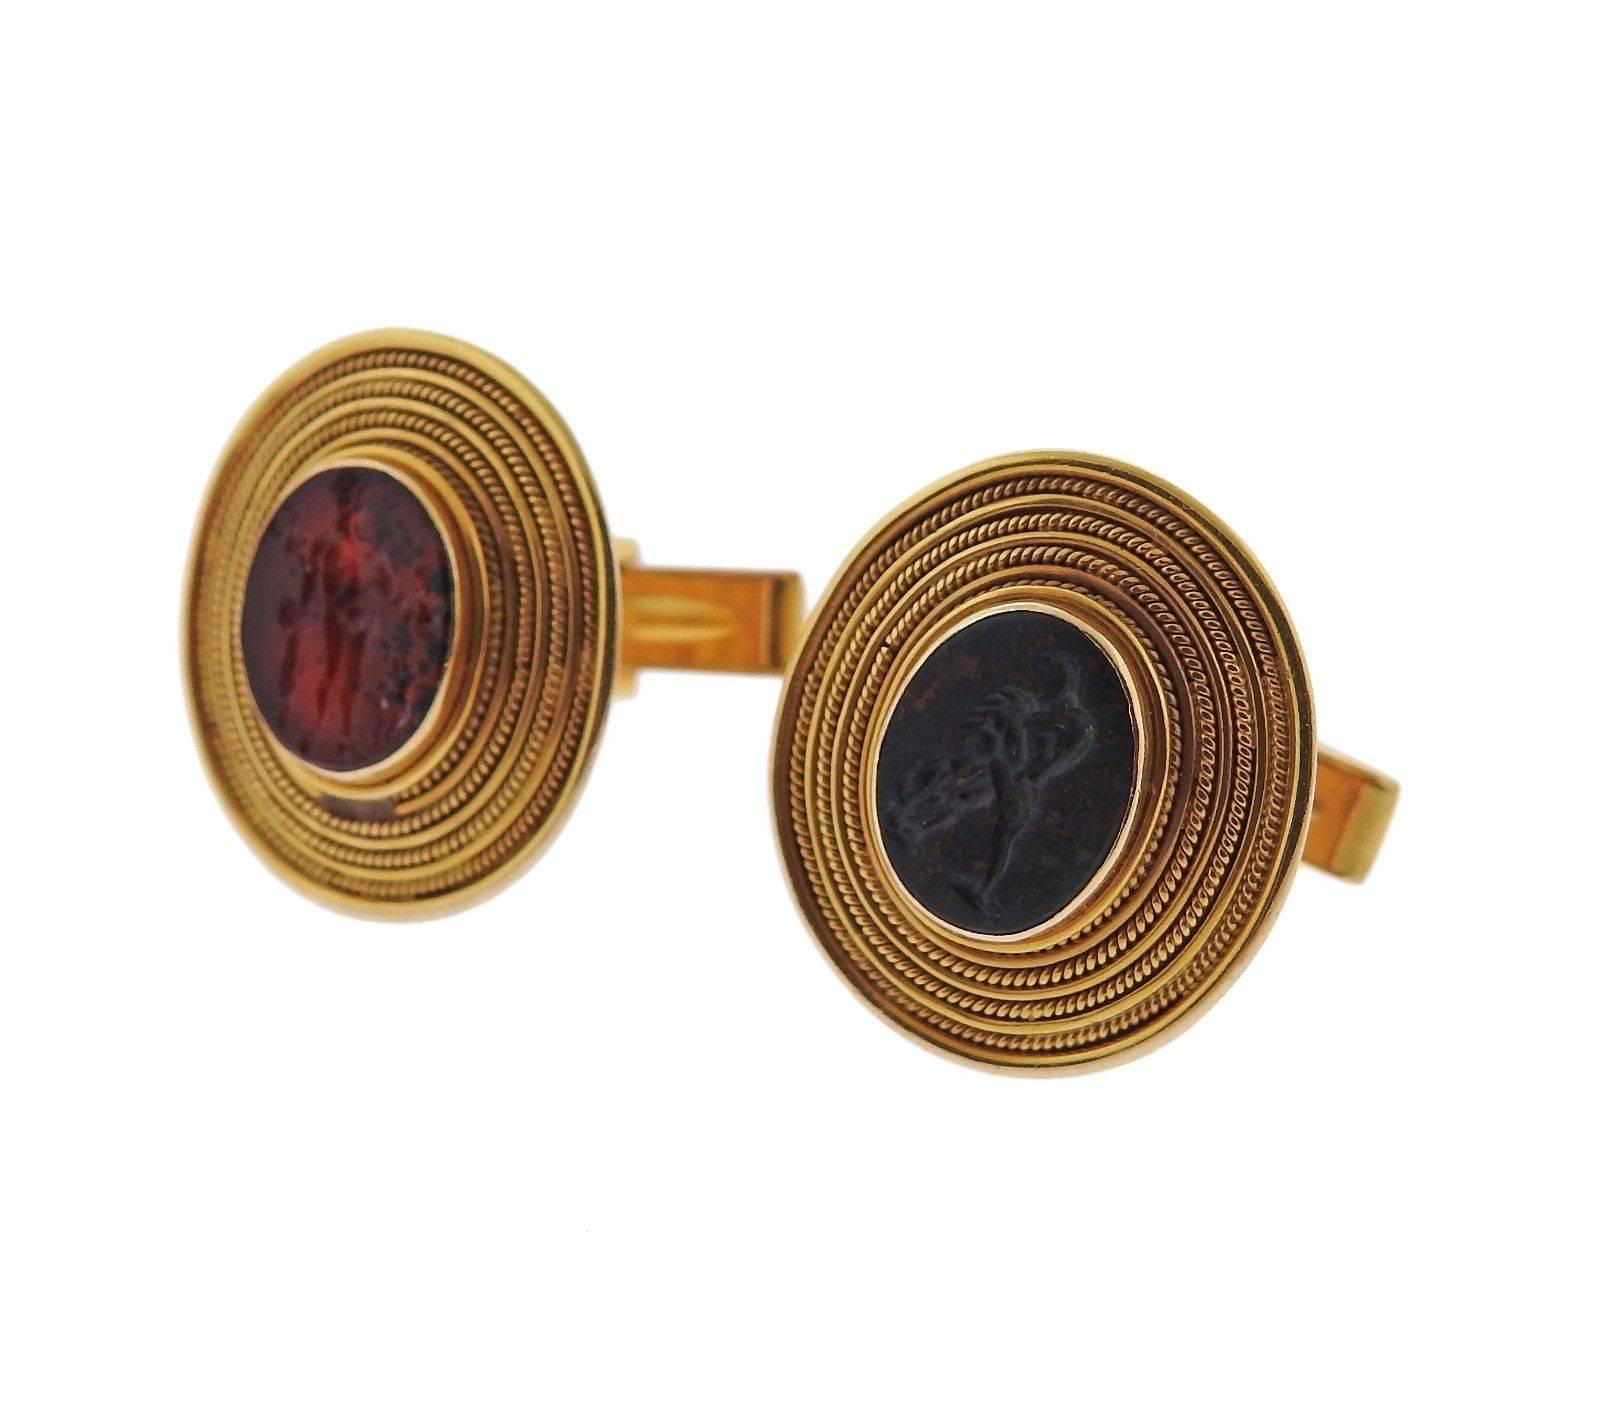 A pair of 14k yellow gold cufflinks set with hardstone intaglio.  The cufflinks measure 23mm x 21mm and weigh 17 grams.